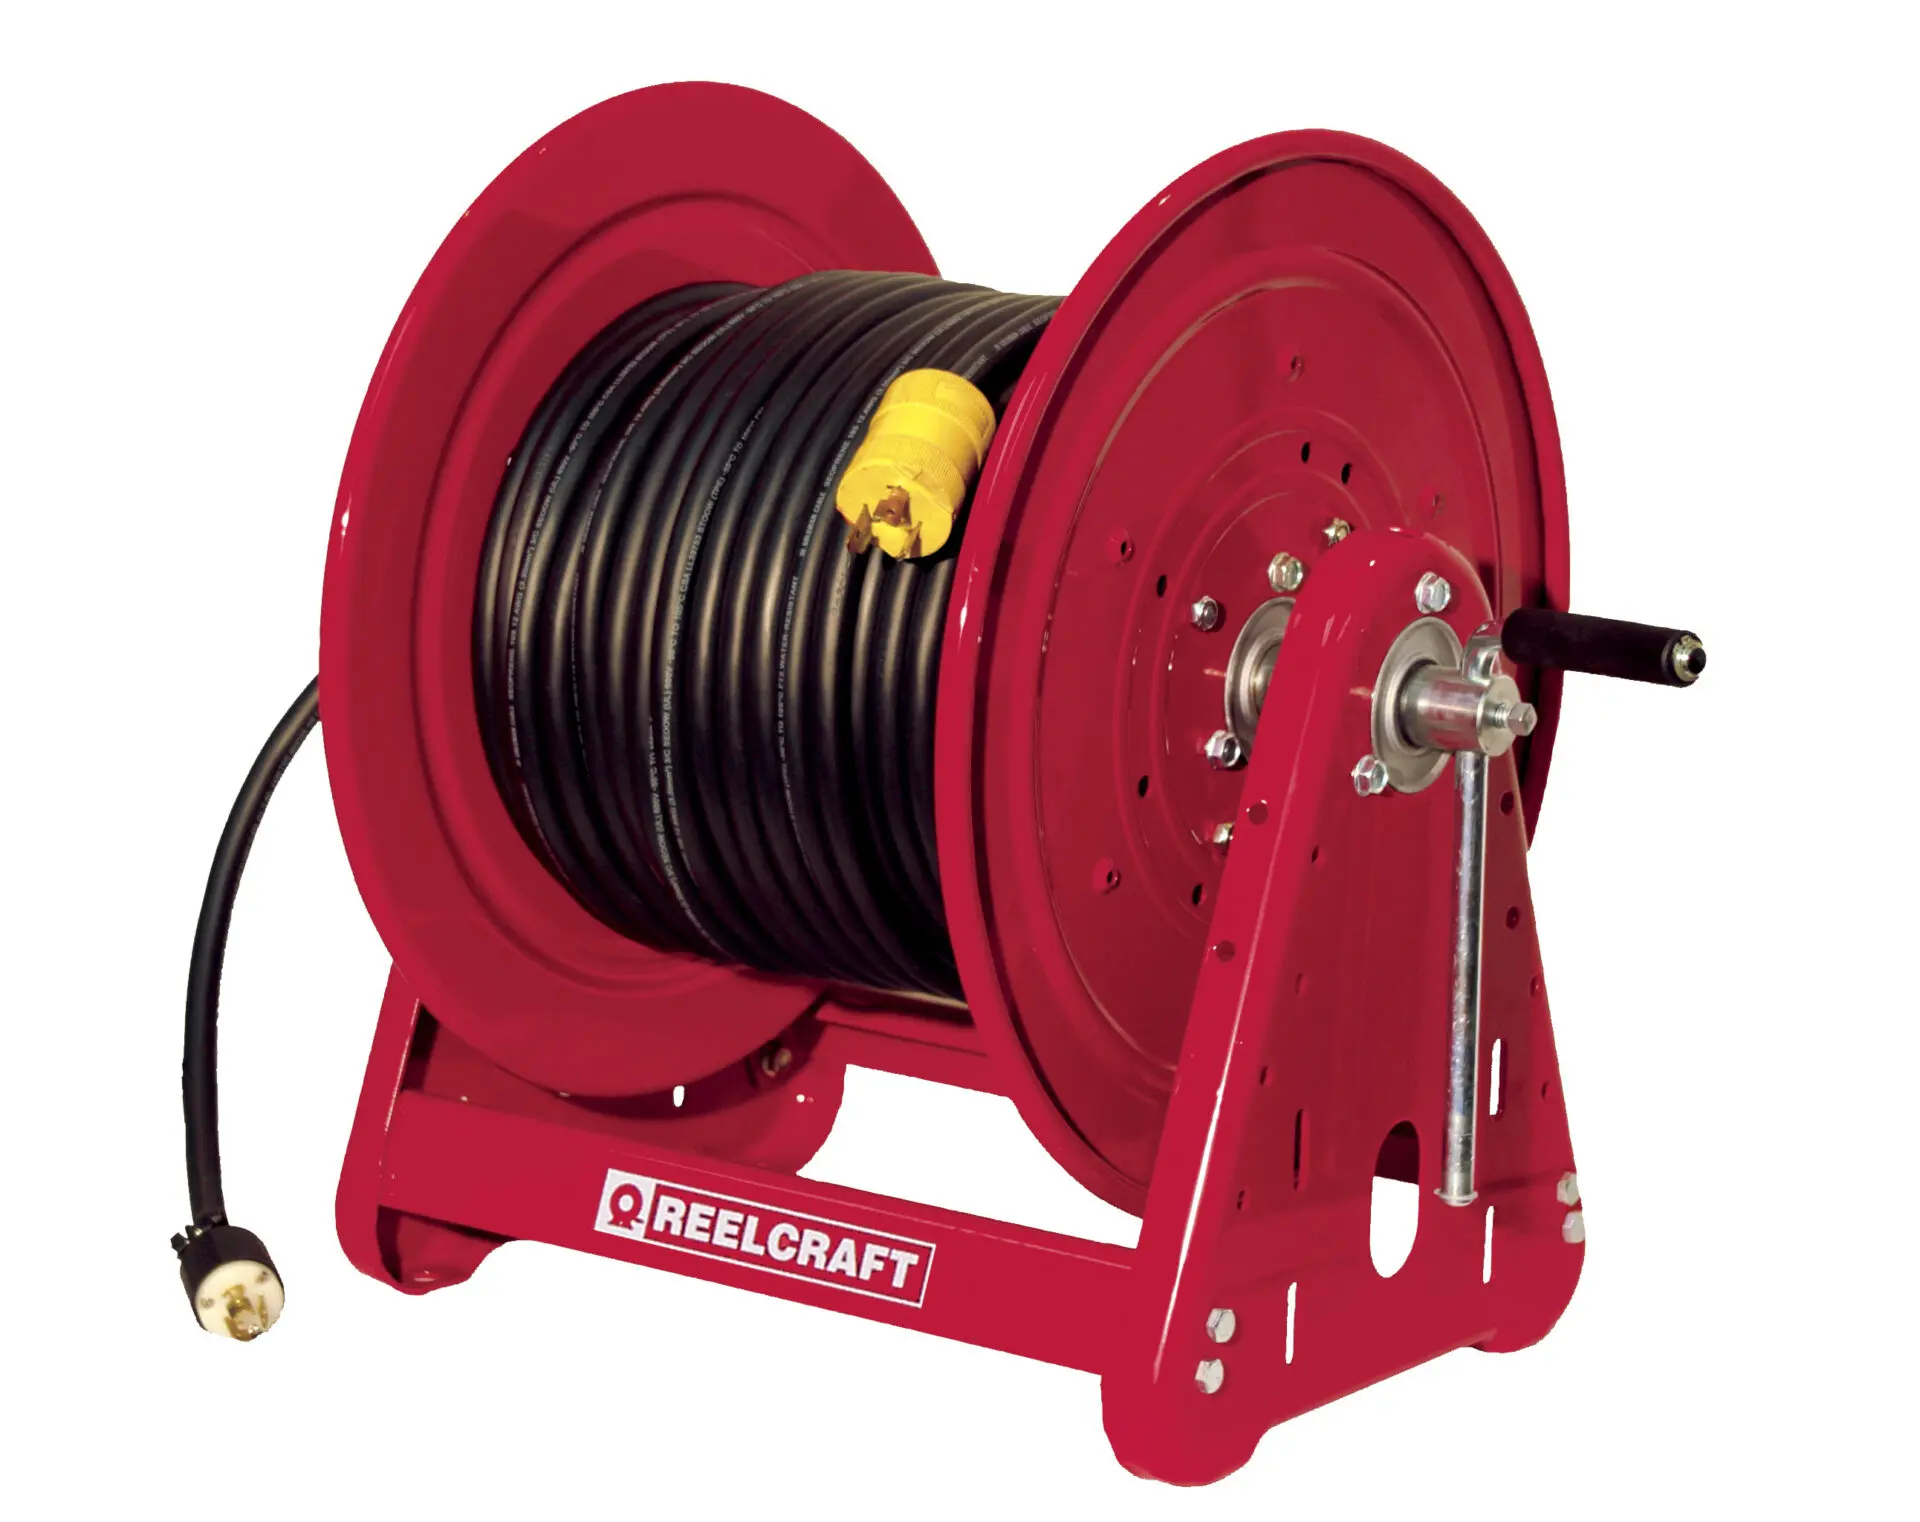 Reelcraft - Hose, Cord & Cable Reels - Anderson Process